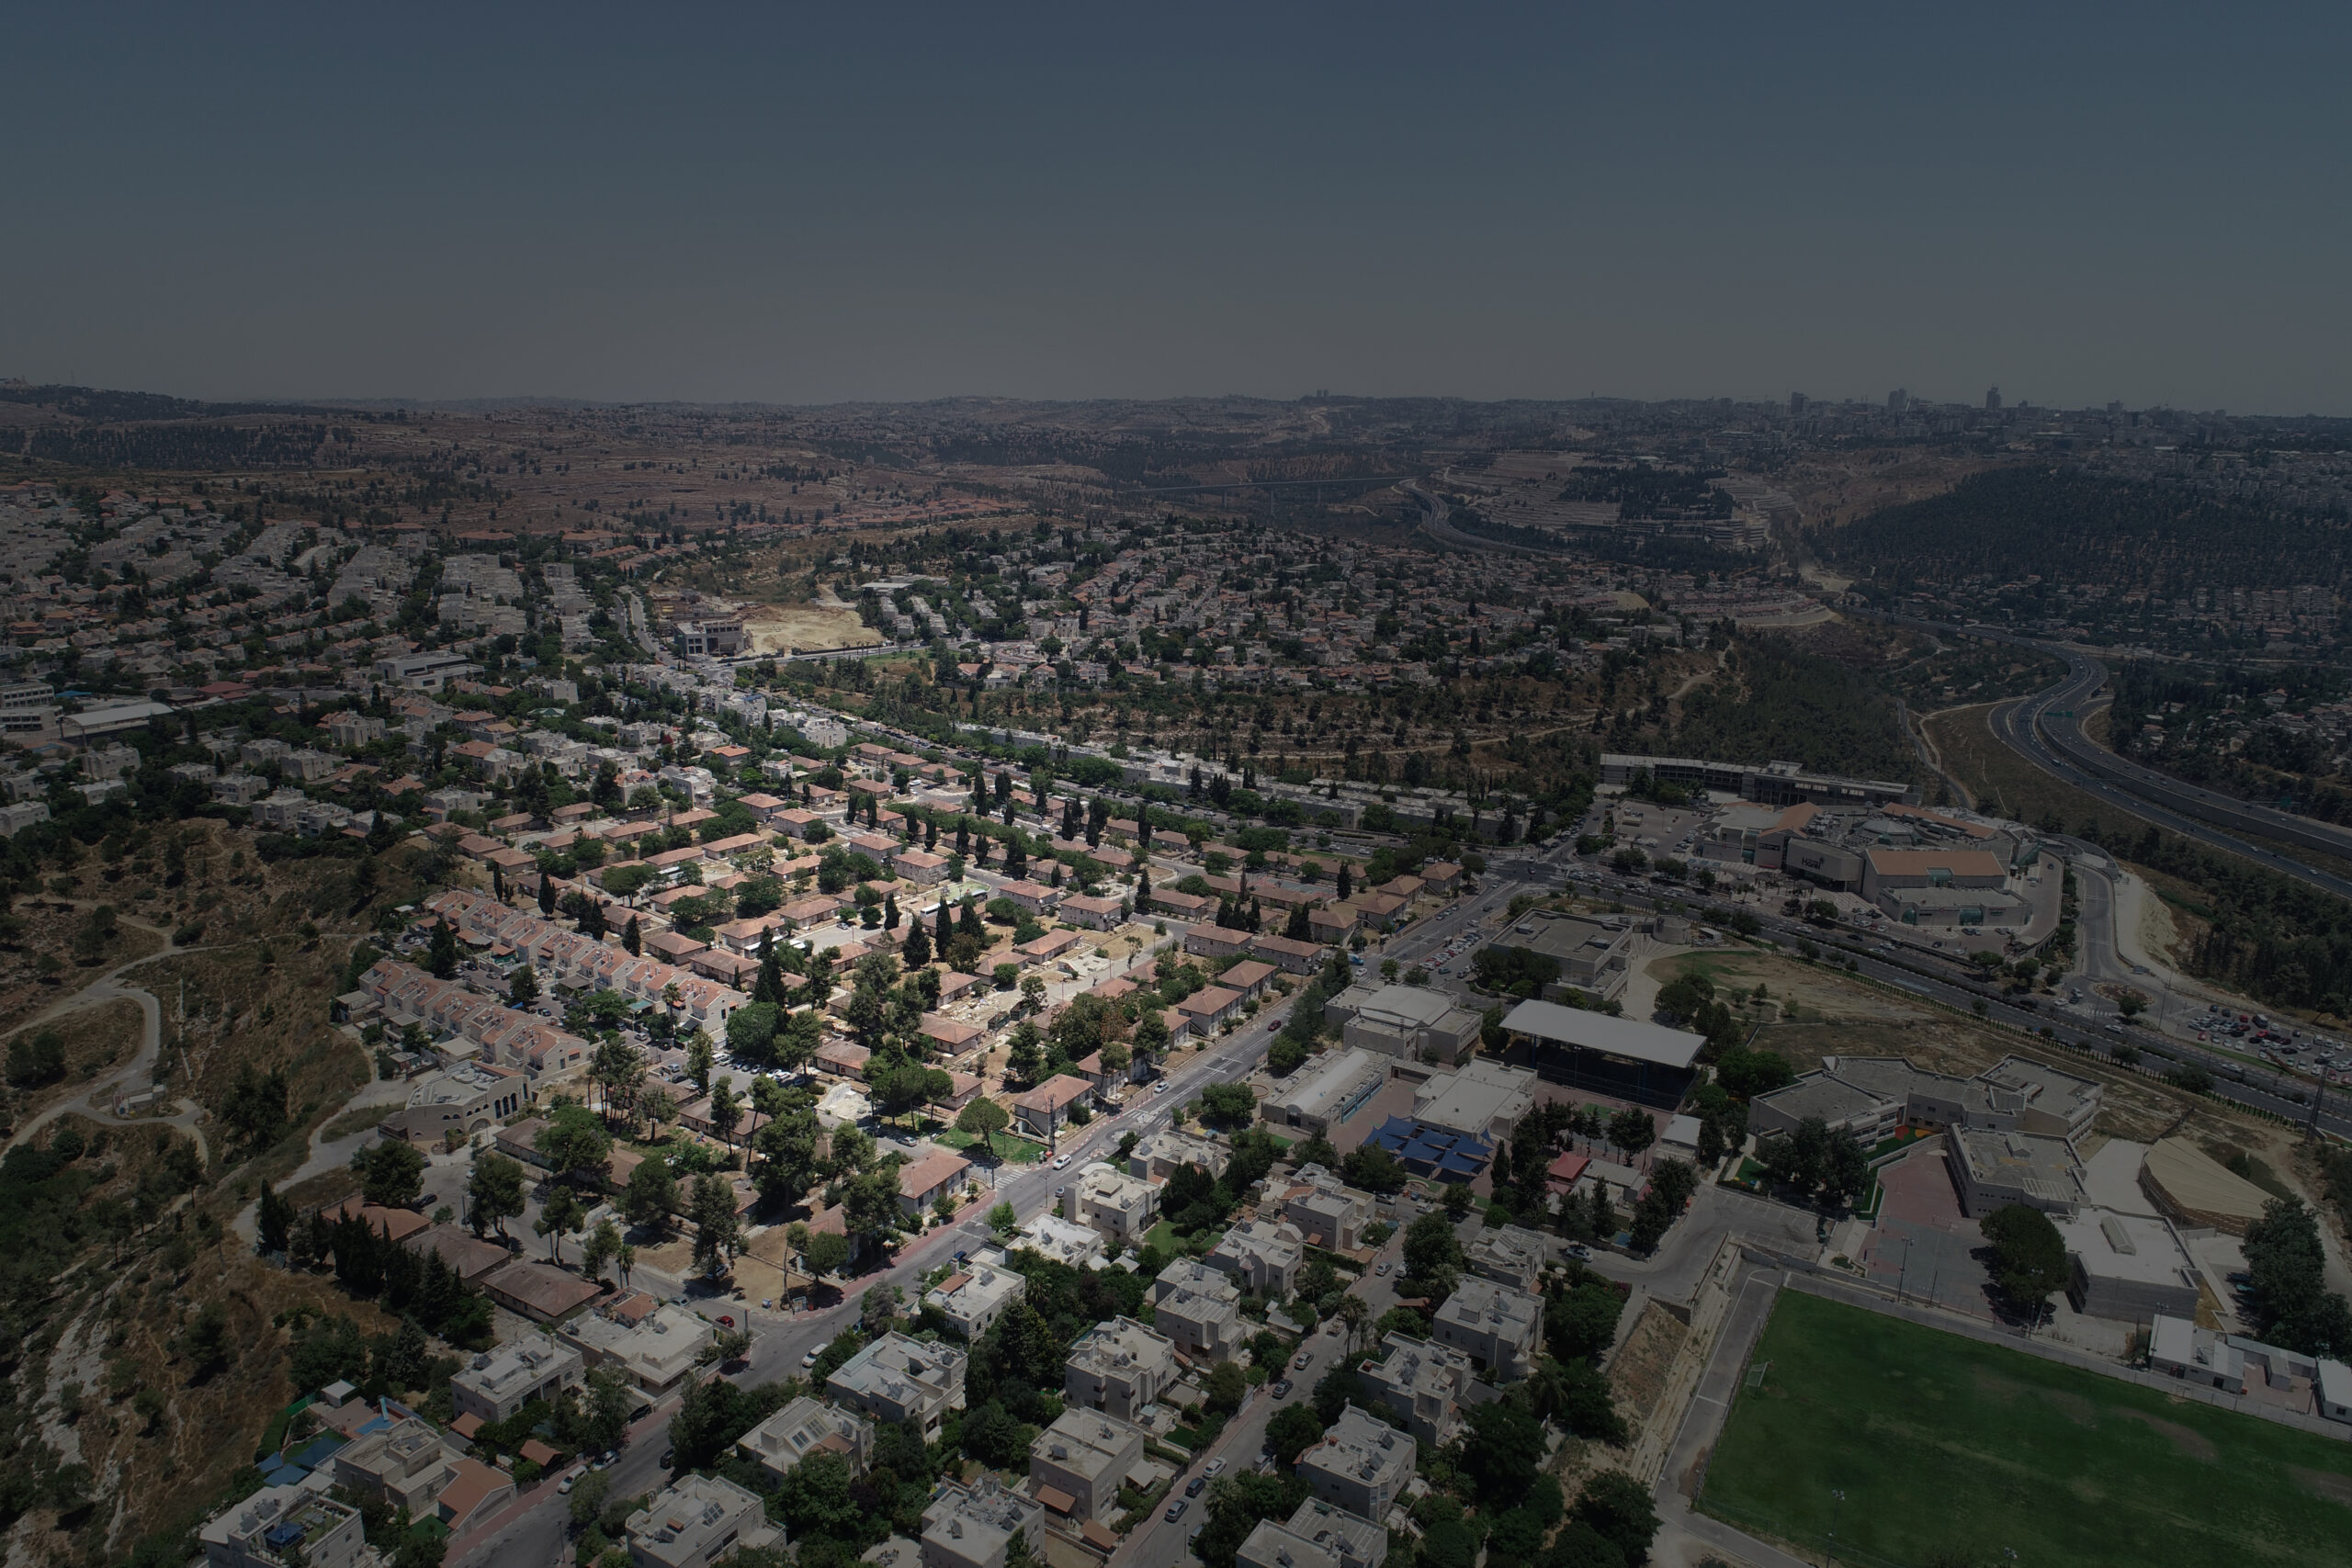 Lev Mevaseret: A value-add development of a green residential neighborhood designed for young families in the heart of Mevaseret Zion | Reality the Leading Group of Real Estate Investment Funds in Israel